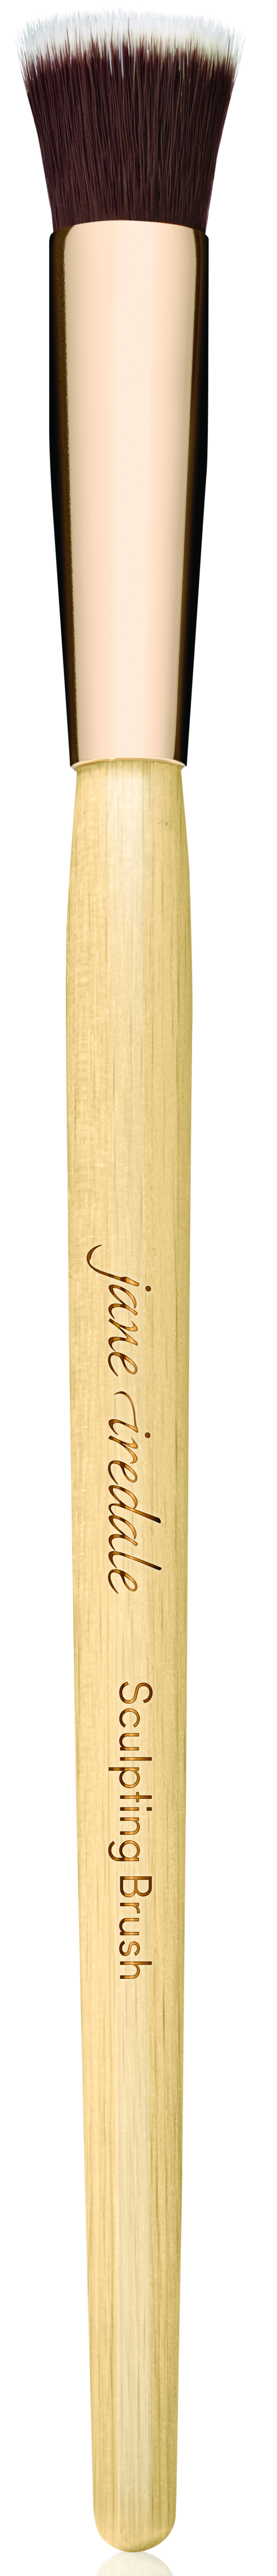 Jane Iredale Brushes Sculpting